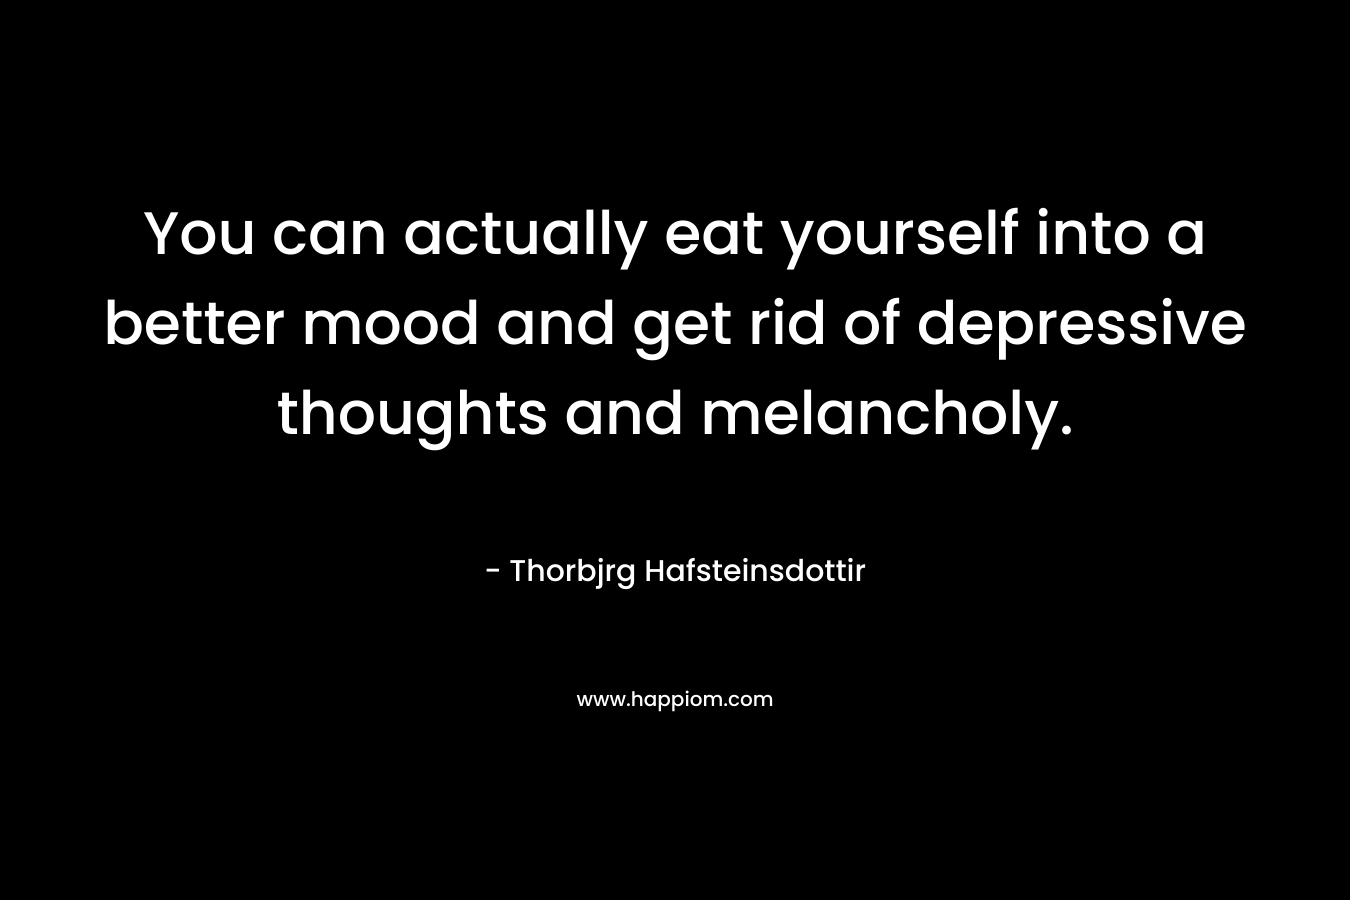 You can actually eat yourself into a better mood and get rid of depressive thoughts and melancholy. – Thorbjrg Hafsteinsdottir